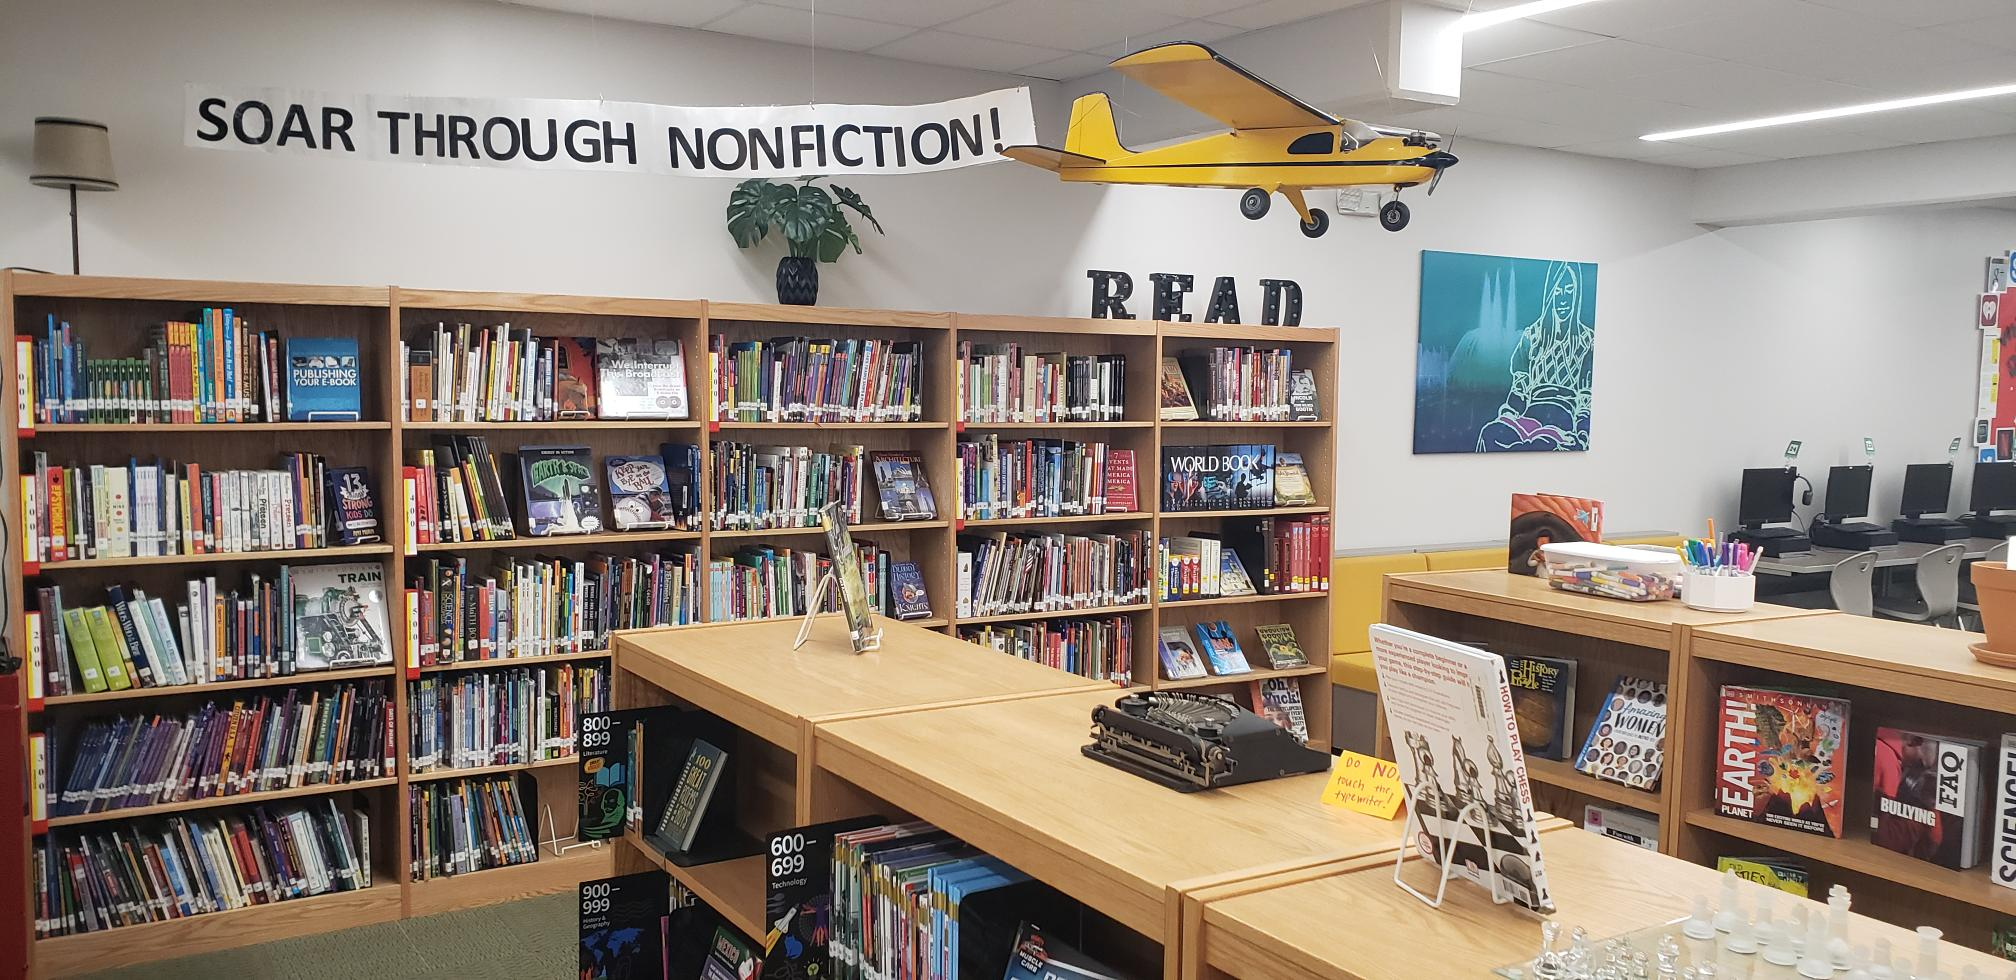 books with an airplane and tail tag that says Soar Through Nonfiction!